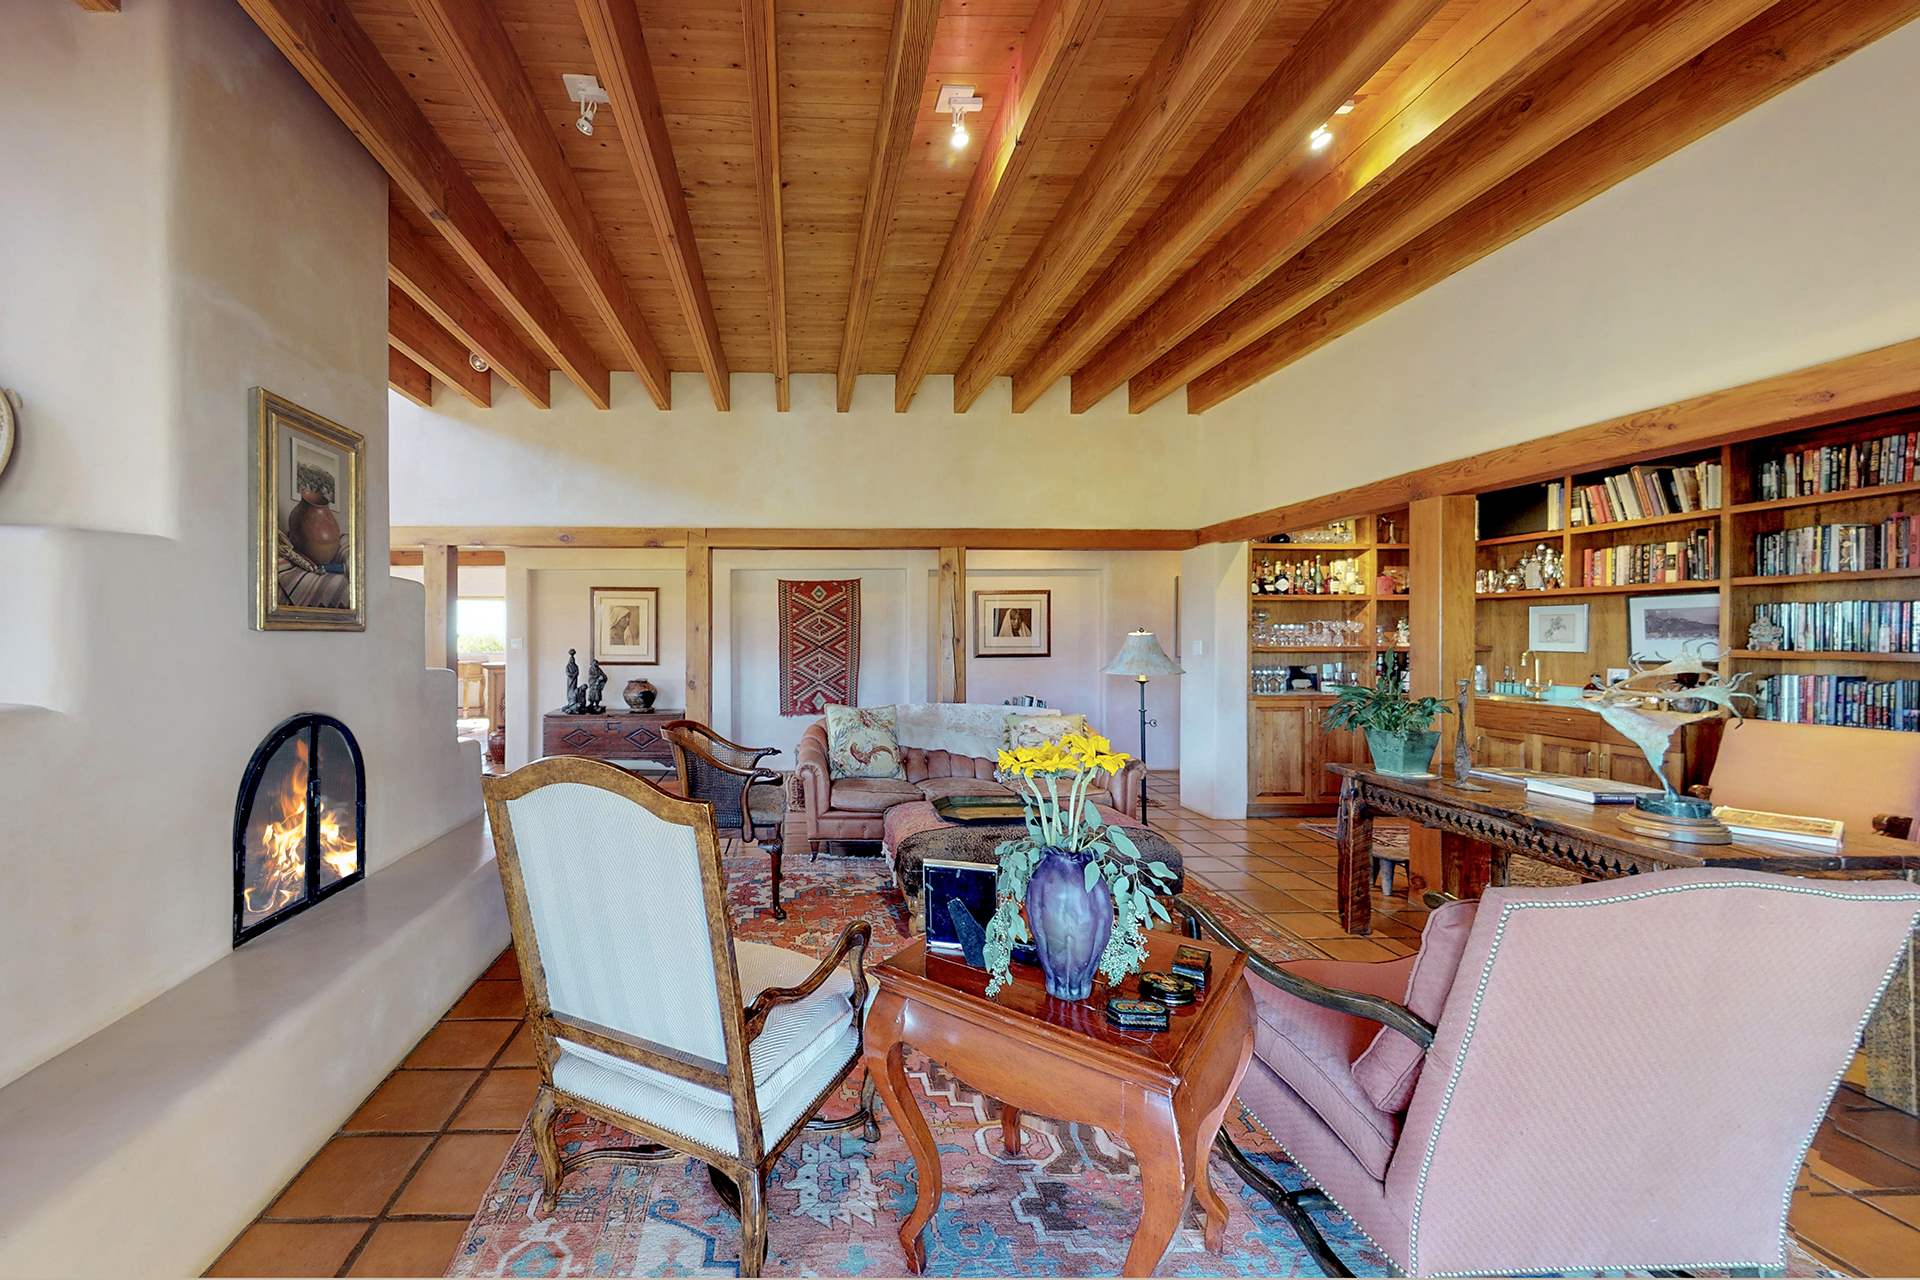 48 Mariposa Ranch 48, Taos, New Mexico 87571, 4 Bedrooms Bedrooms, ,3 BathroomsBathrooms,Residential,For Sale,48 Mariposa Ranch 48,201904542